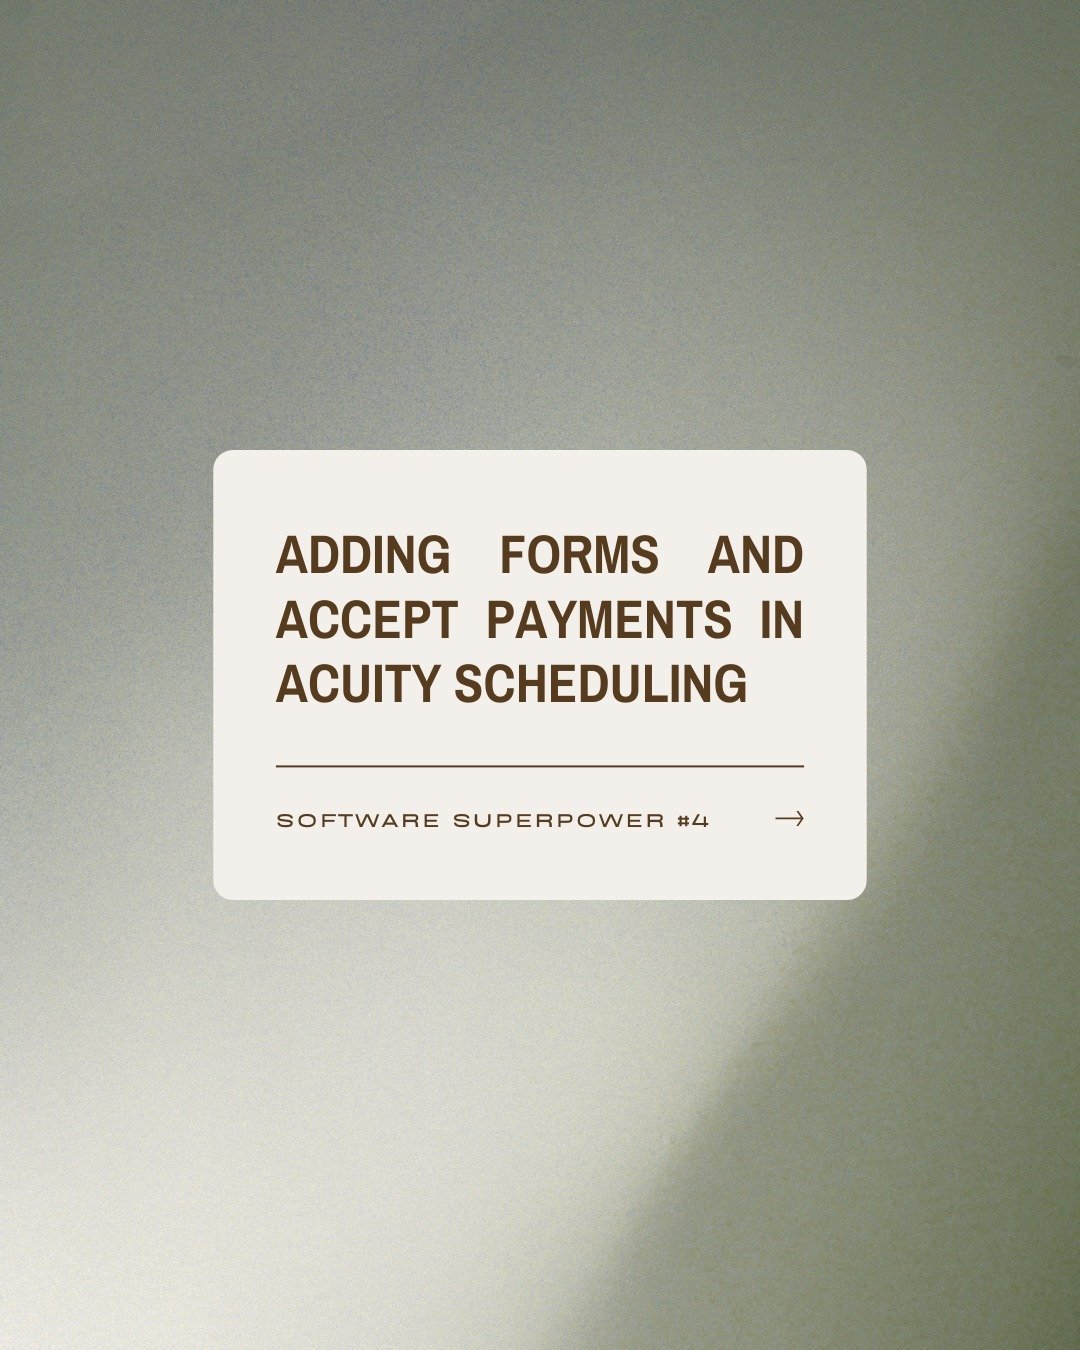 Acuity Superpower #4 - You can add forms to gather information automatically when a client books an appointment, and you can also accept payment for your appointments in advance.⁣
⁣
There are a few key pieces of information that we need to gather whe